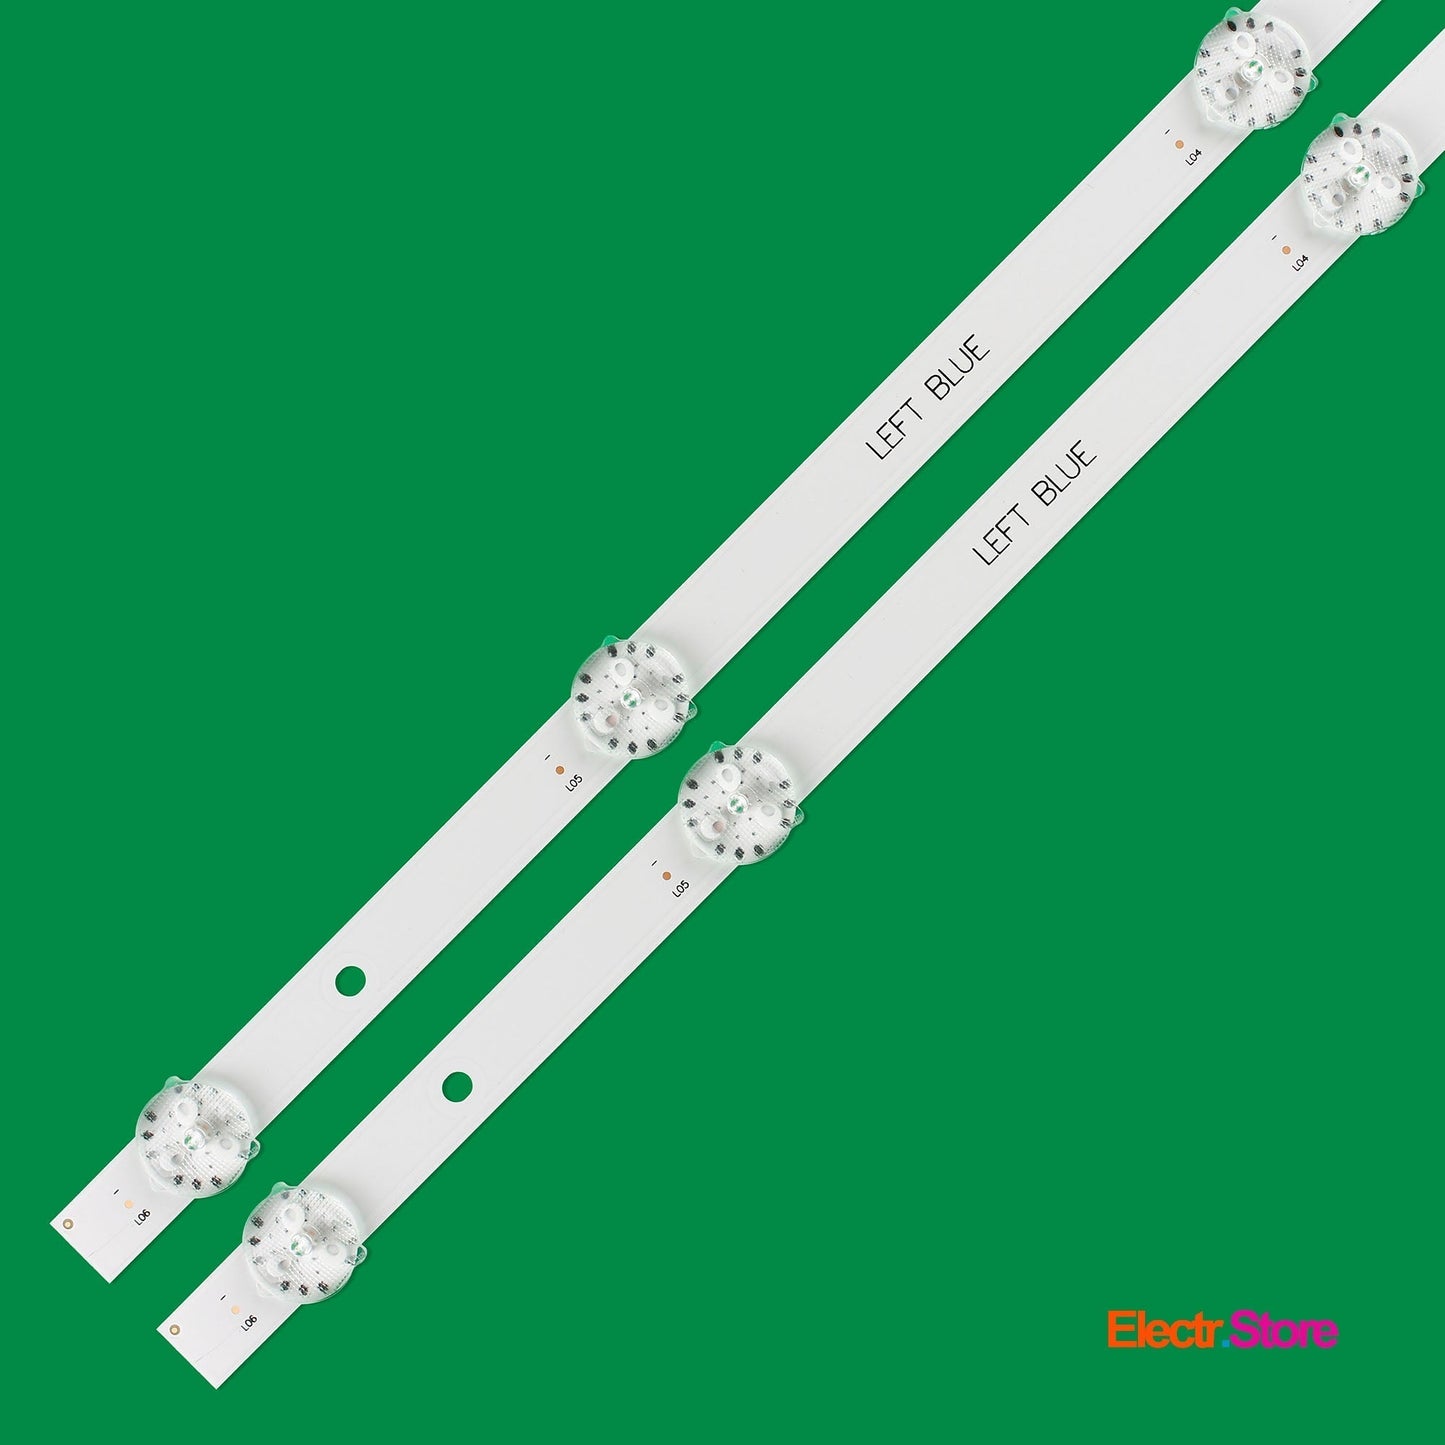 LED Backlight Strip Kits, JL.D32061330-057GS-M, JL.D32061330-004AS-M, 4C-LB320T-JF3/JF4 (2 pcs/kit), for TV 32" THOMSON: 32HC3106, 32HS3013, 32HS3013S, 32HS3023S 32" JL.D32061330-057GS-M LED Backlights Multi Others TCL THOMSON Whaley Electr.Store